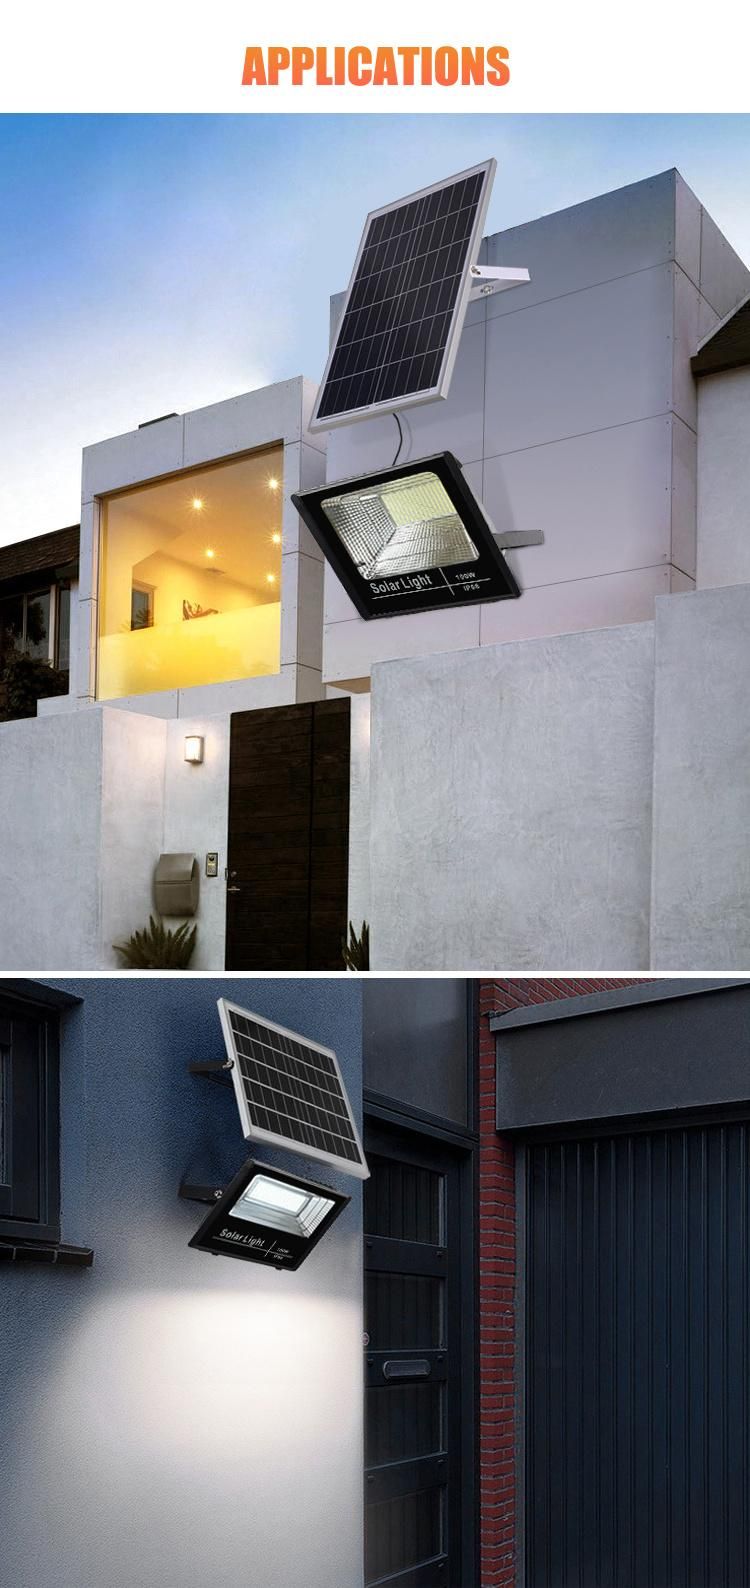 Die Cast Aluminum Waterproof Outdoor Solar Floodlight 40W with Remote Control Yard Light